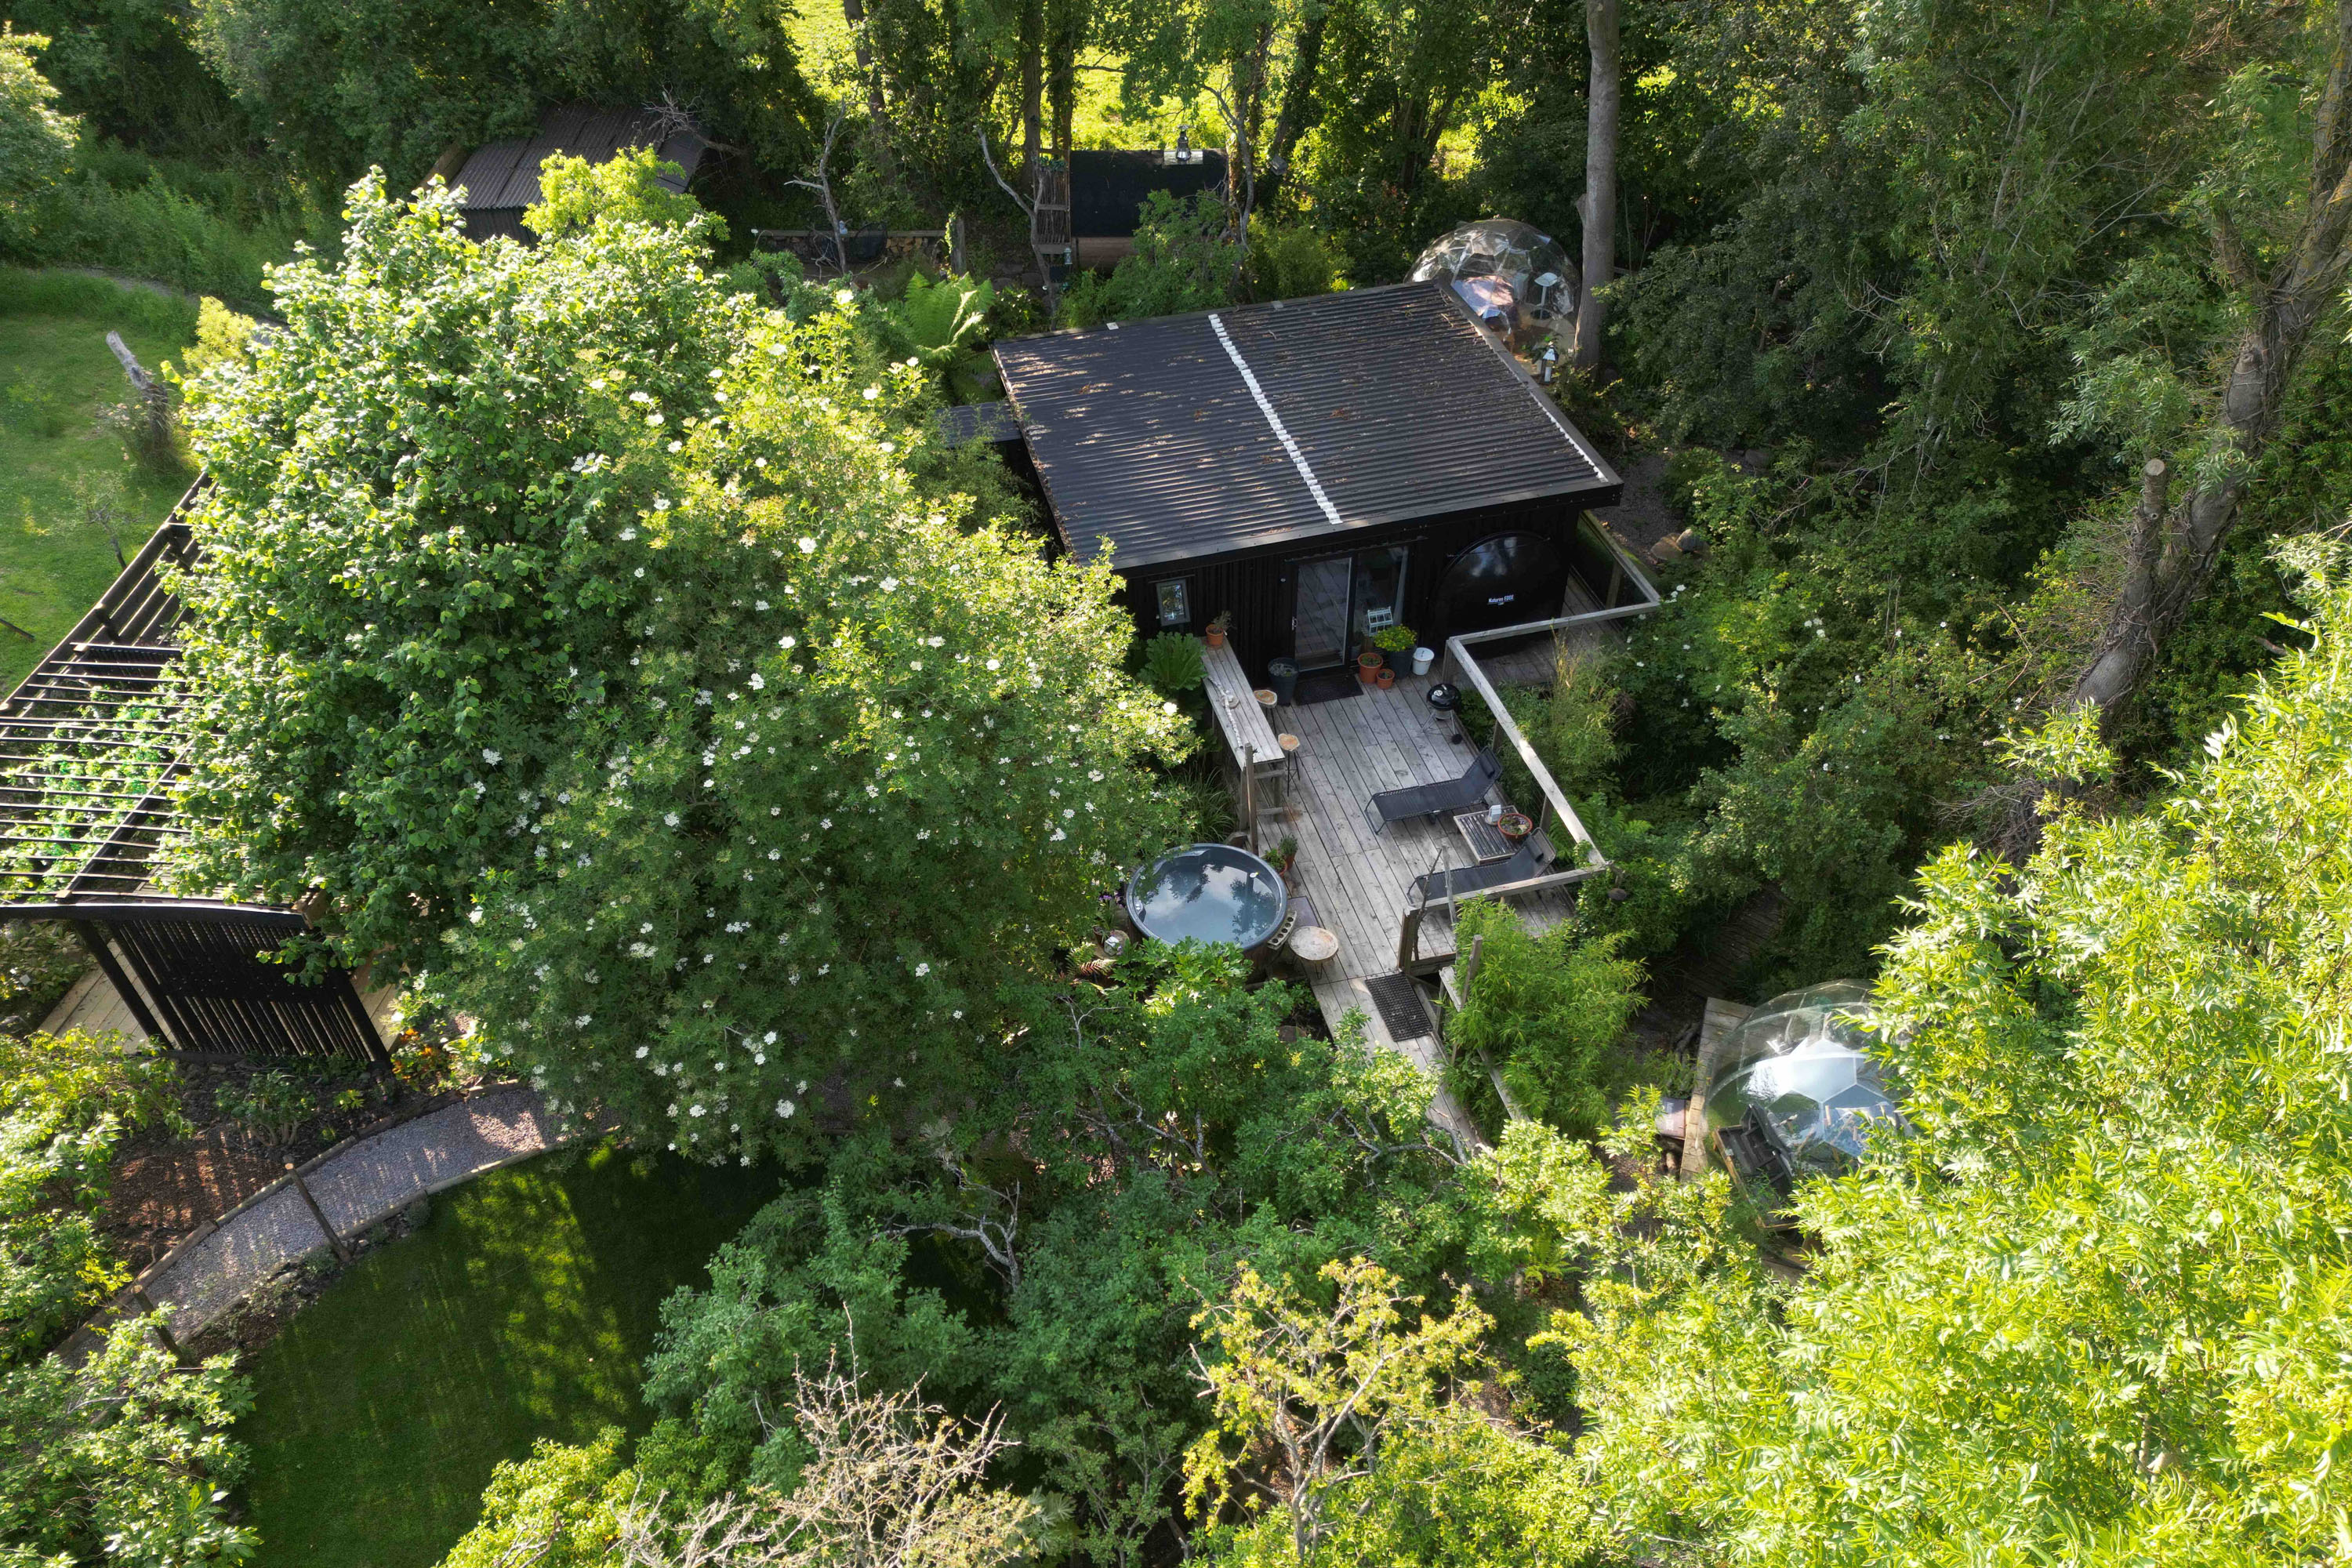 Ariel shot of a timber clad flat roofed cabin nestled in a grove in Worcestershire, England.